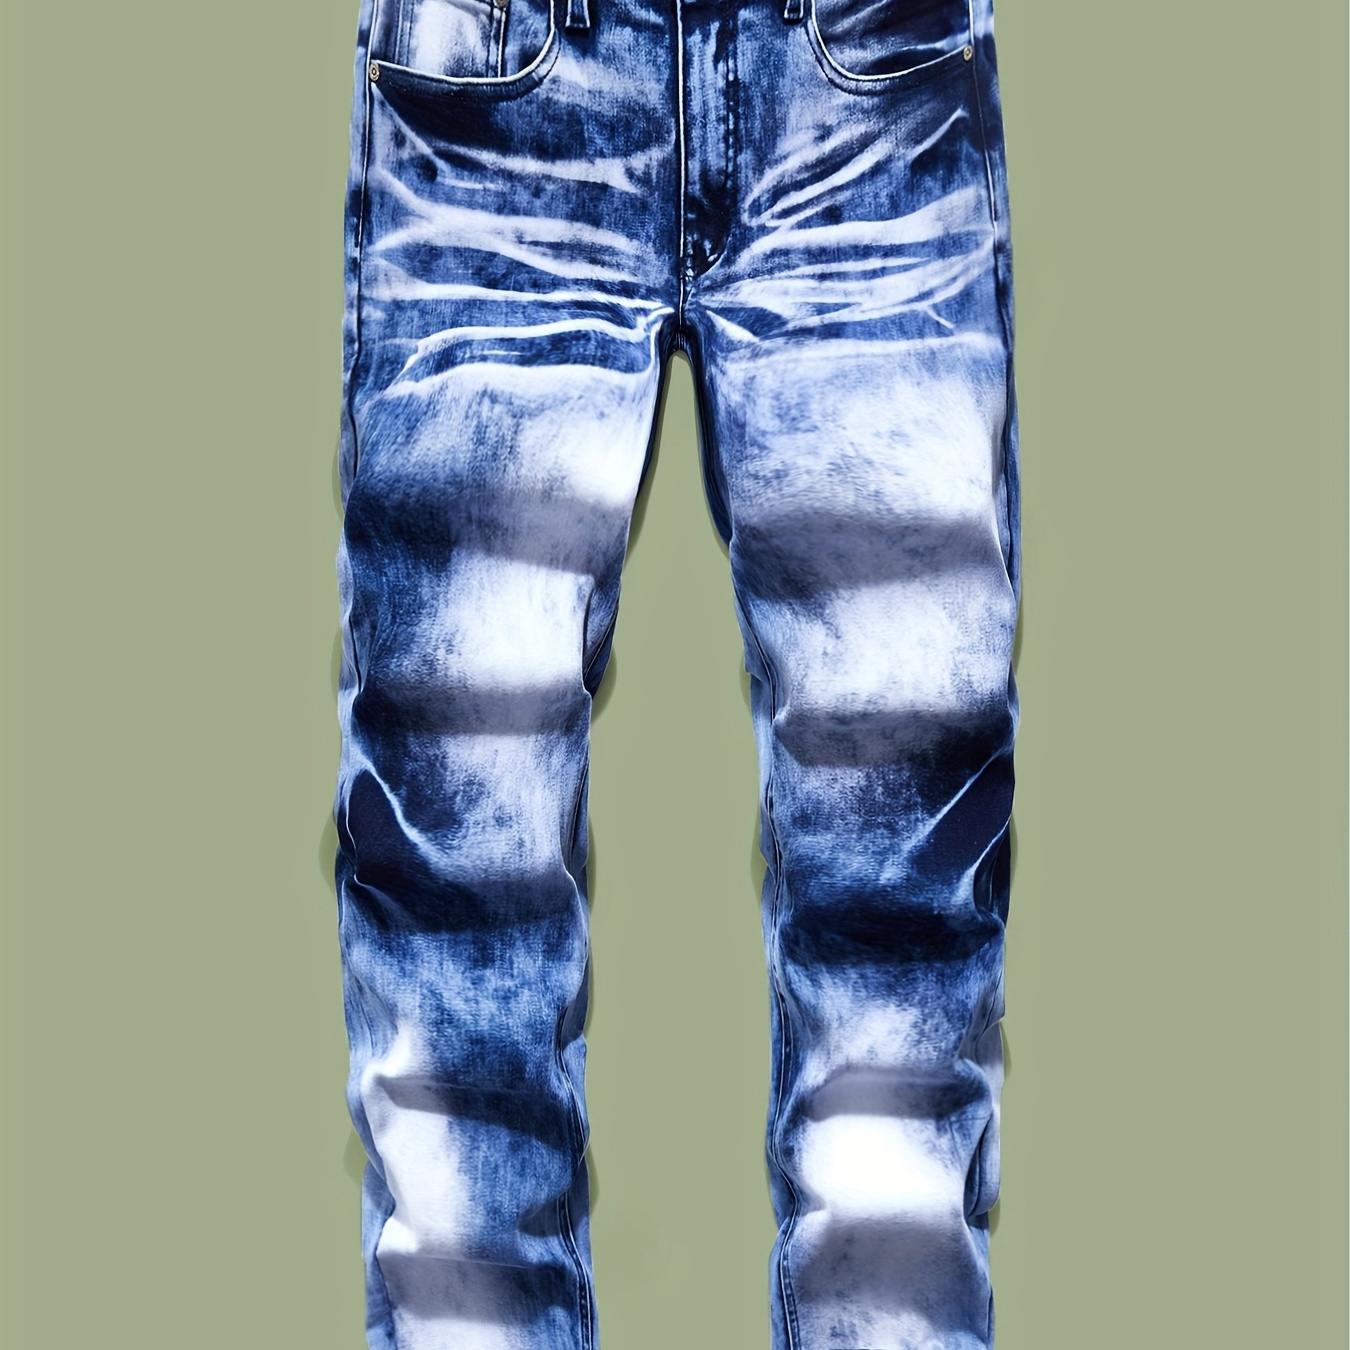 

Men's Cotton Blend Retro Distressed Jeans, Chic Street Style Mid-stretch Slim Fit Bottoms For Men, All Seasons